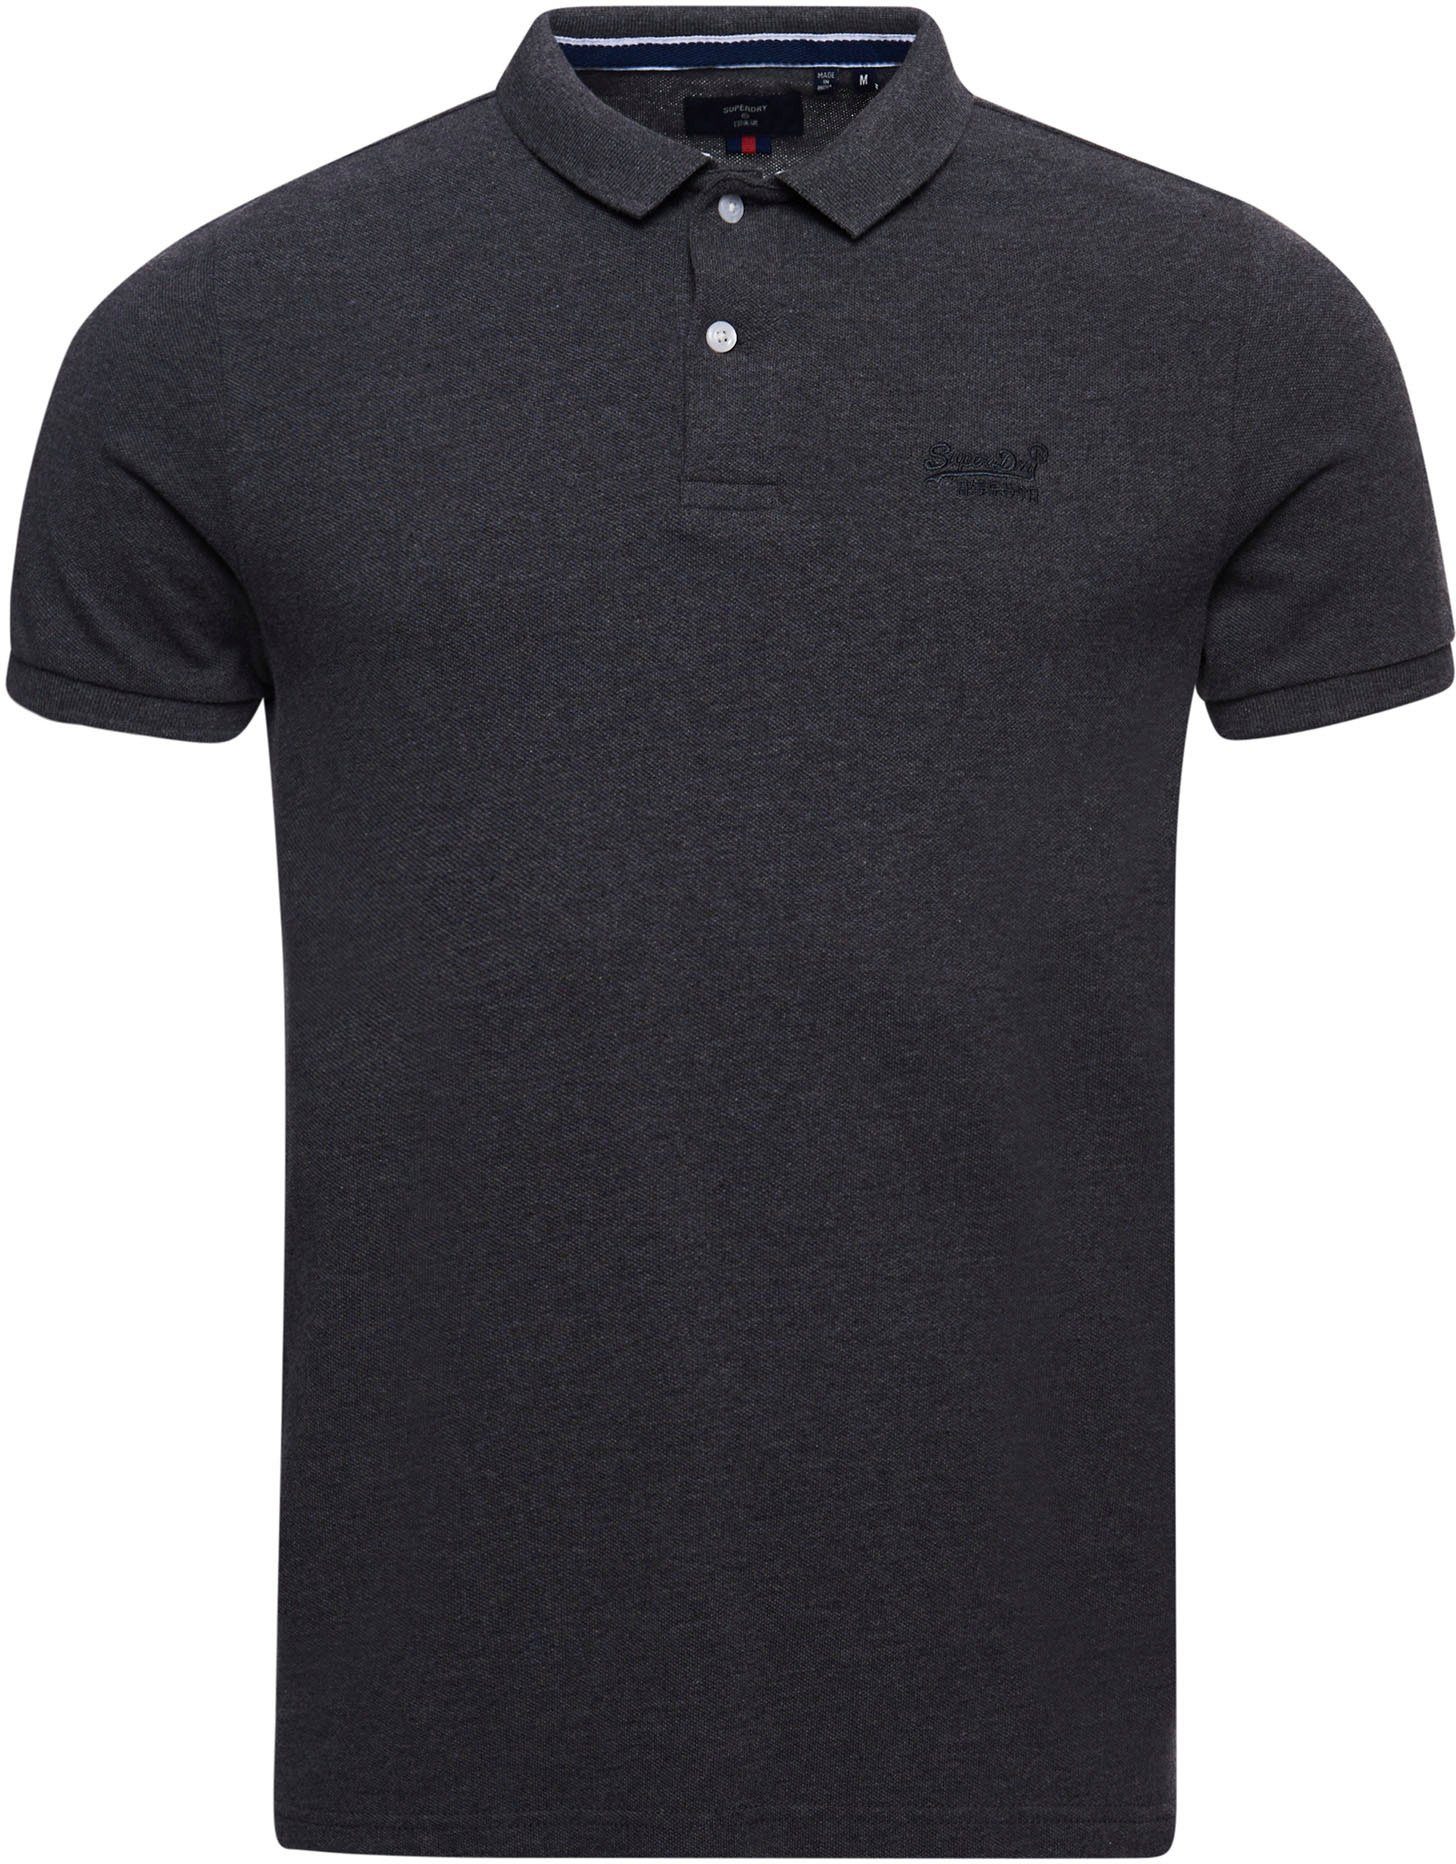 CLASSIC PIQUE Poloshirt rich POLO charcoal marl Superdry